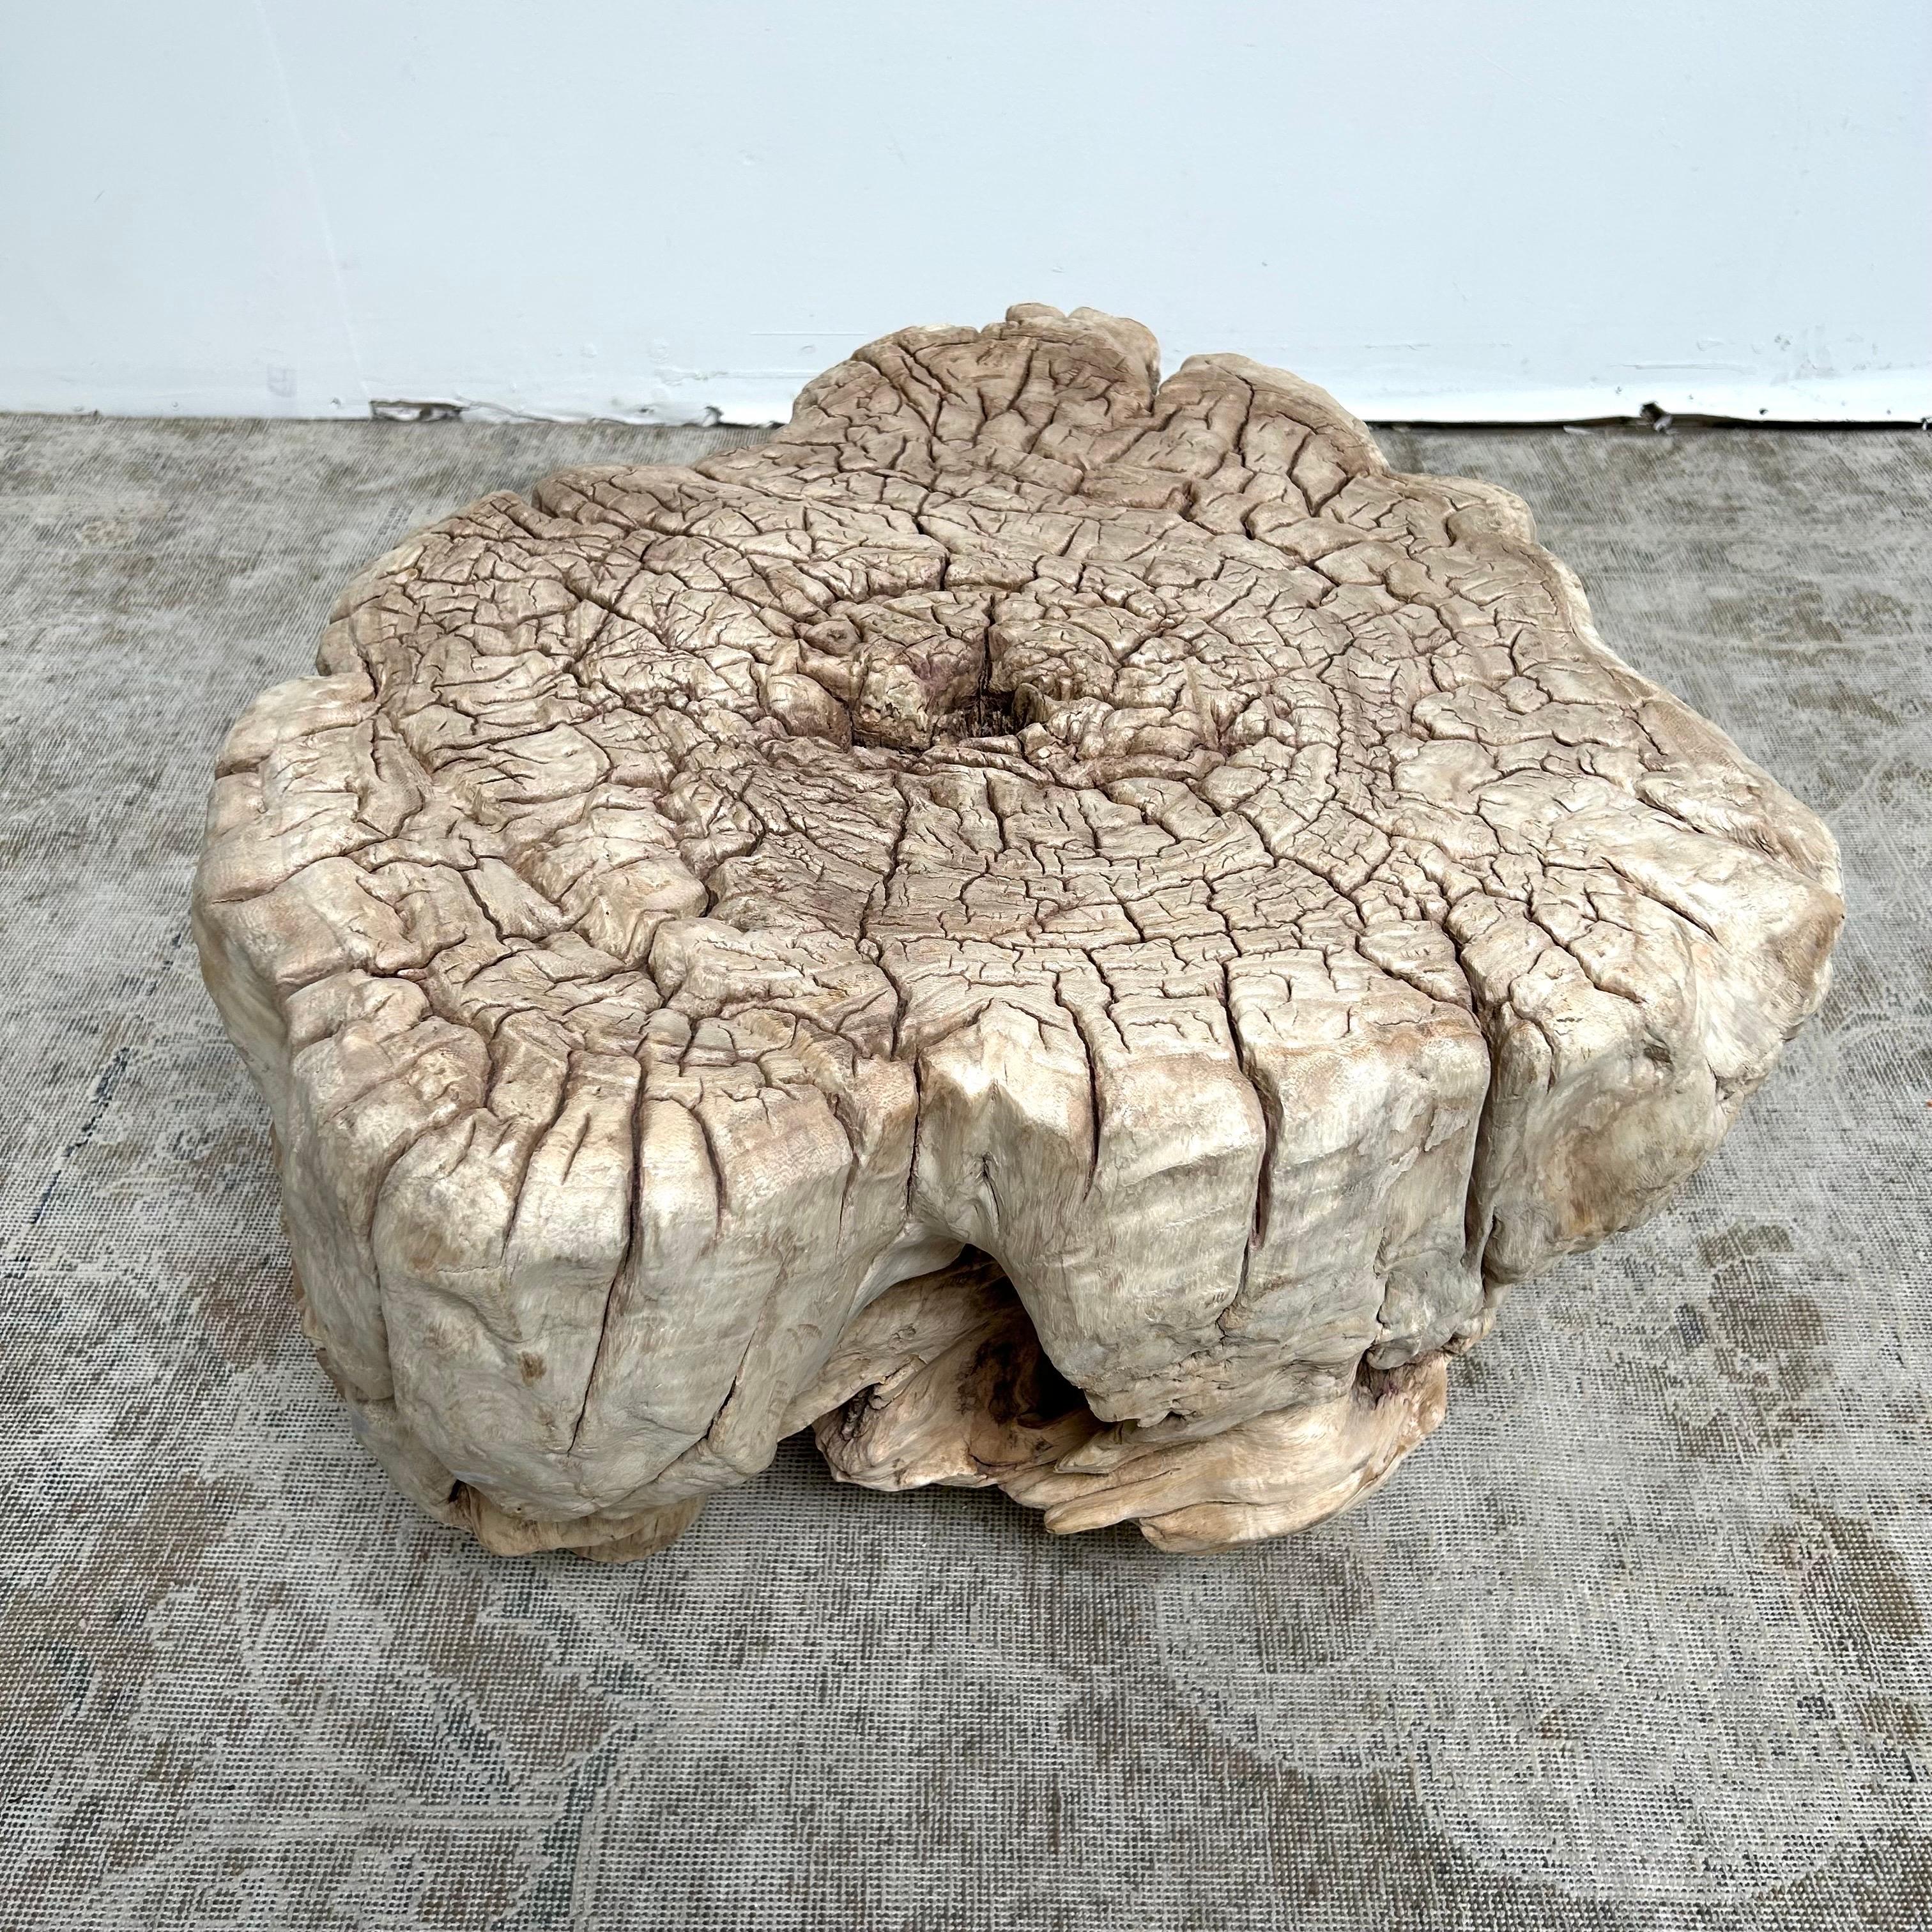 Raw Wood Stump side table 32”w x 30”d x 20”h
Large size beautiful organic stump table in a raw bleached natural finish.
Can be used as a side table, or coffee table, in modern setting, to farmhouse setting.
A very unique one of a kind